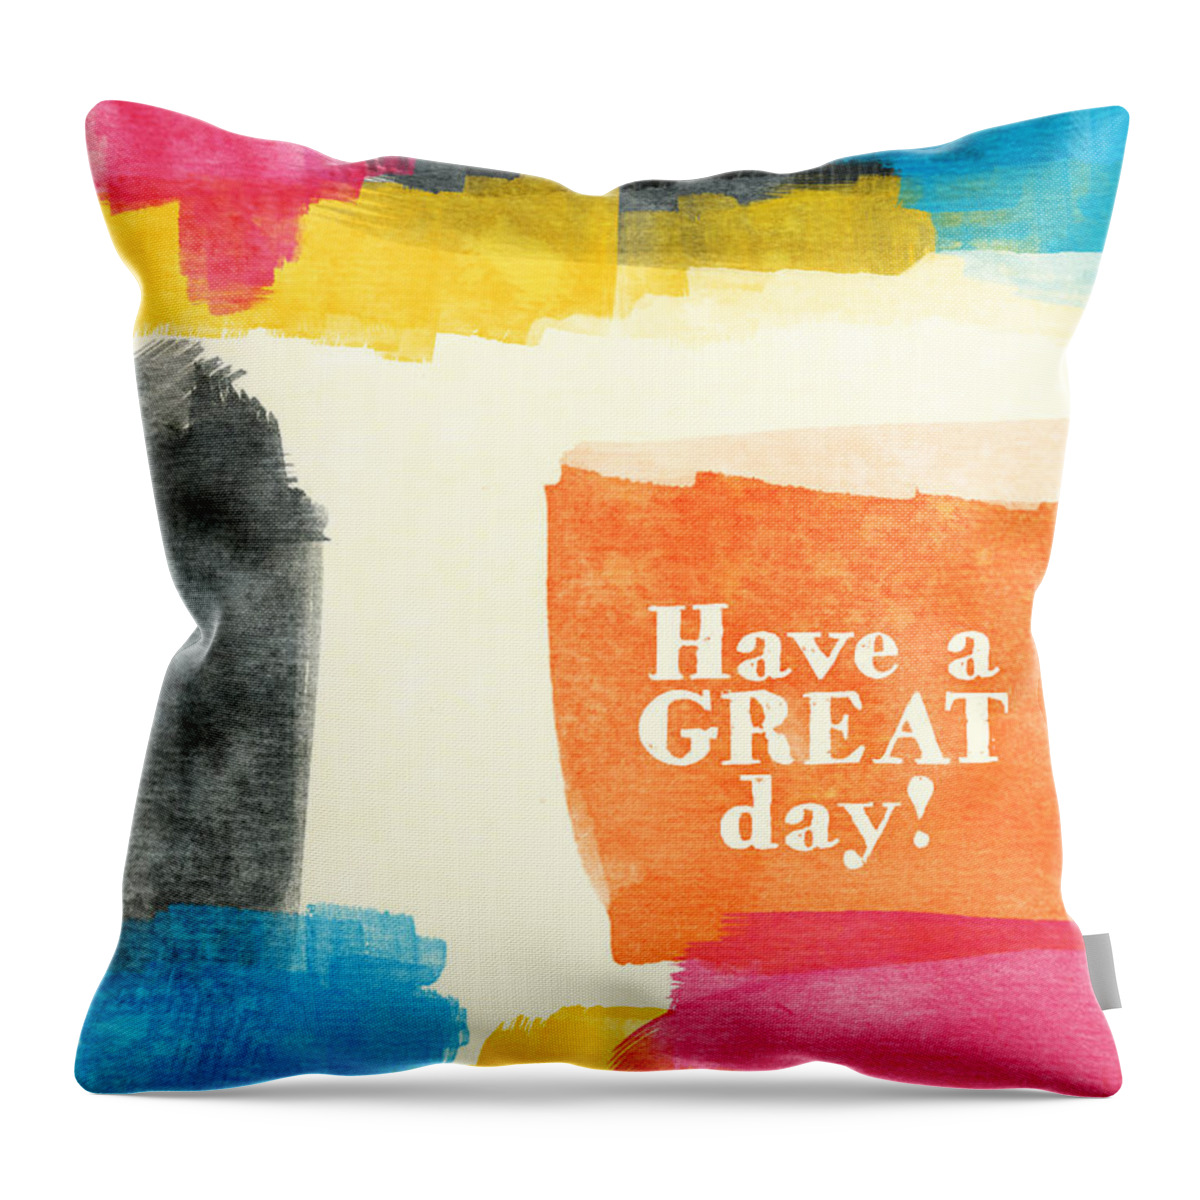 Greeting Card Throw Pillow featuring the mixed media Have A Great Day- Colorful Greeting Card by Linda Woods